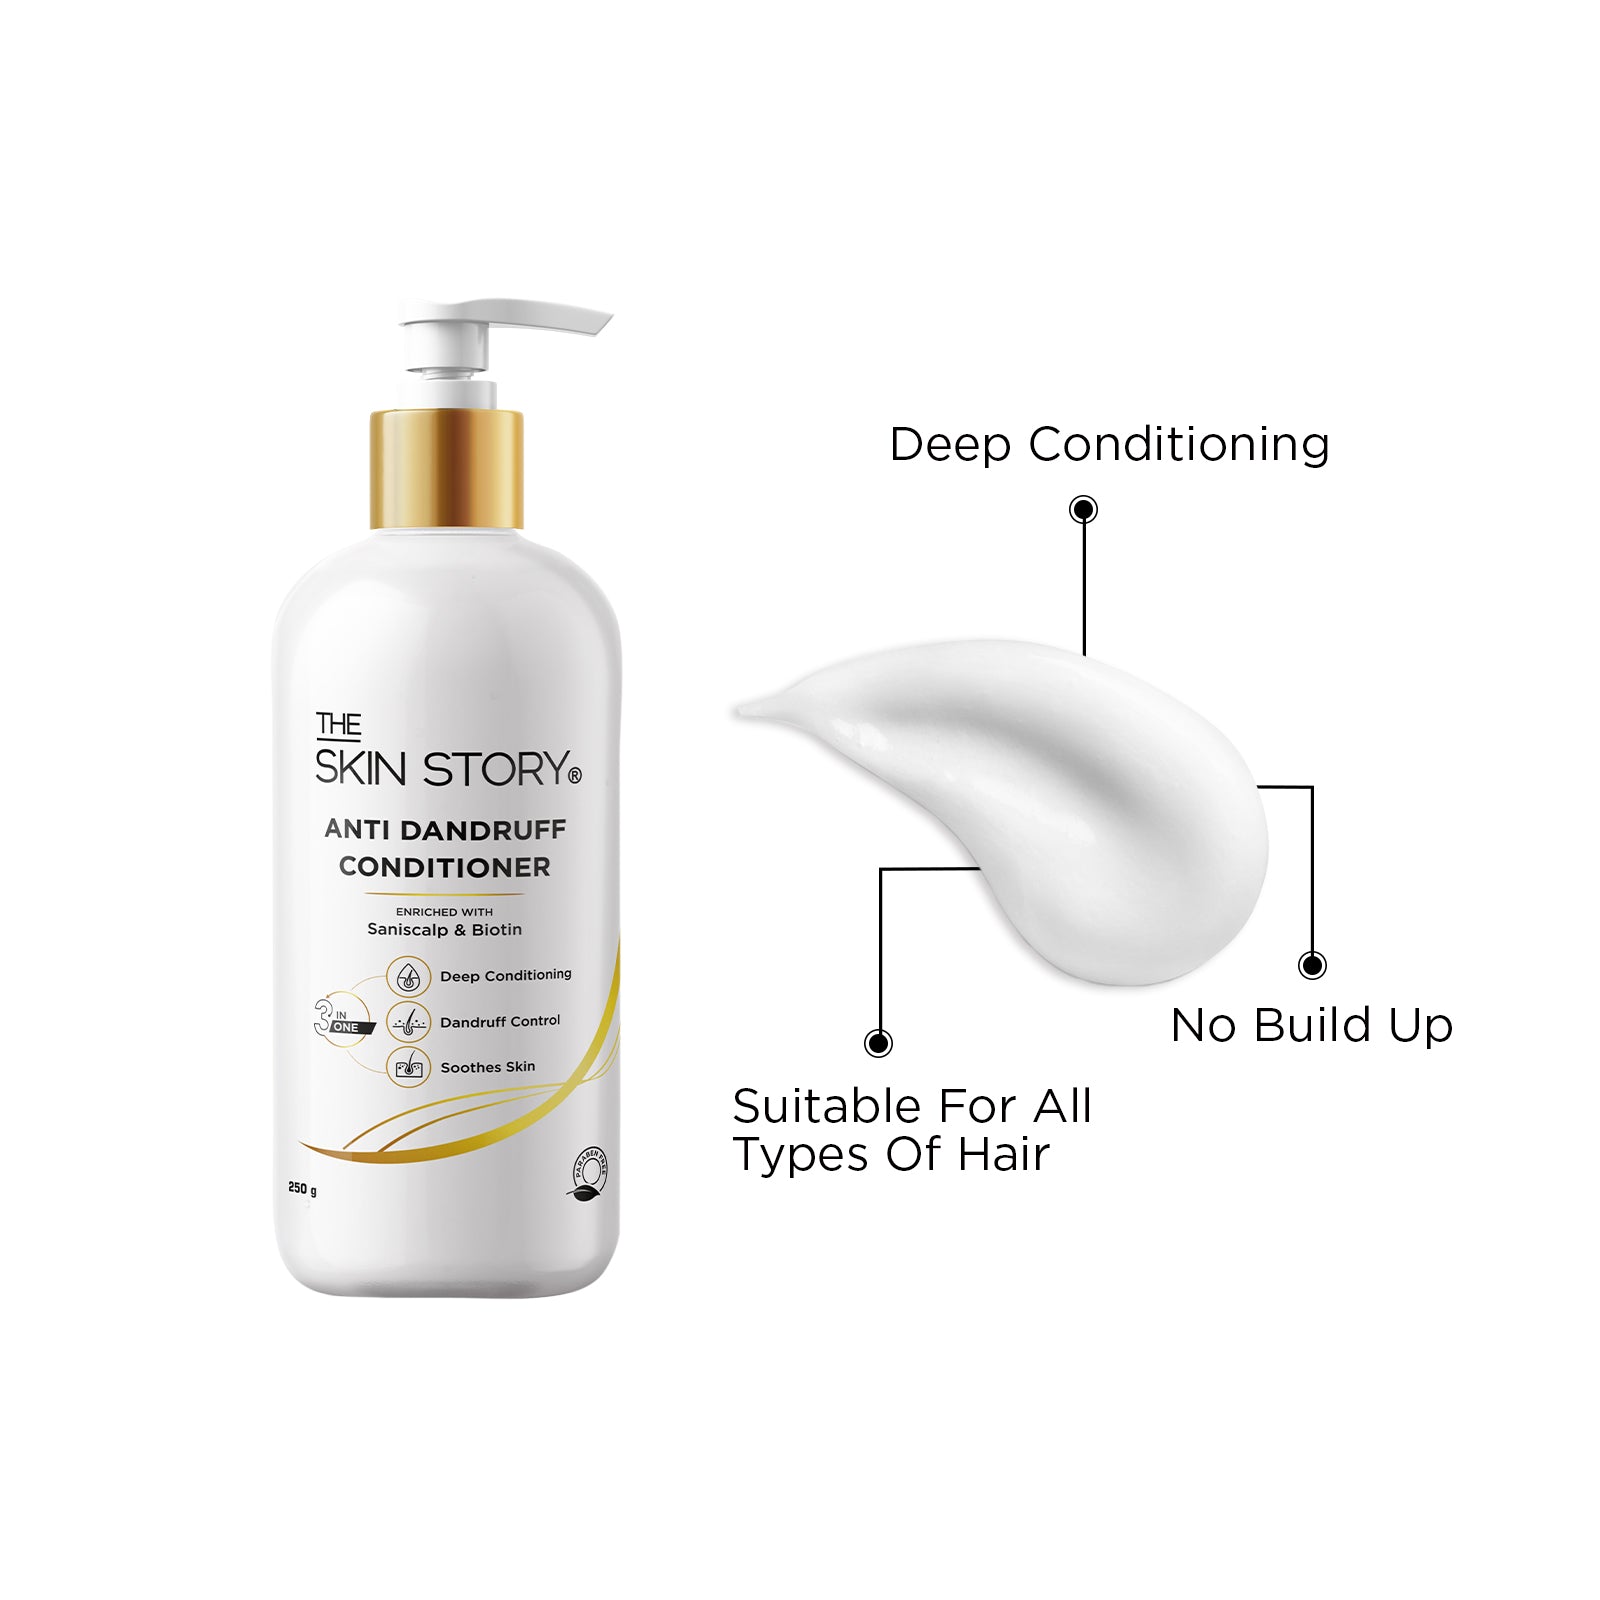 The Skin Story Dandruff Control Conditioner | Repairs Dry and Damaged Hair | With Saniscal & Arginine | 250g